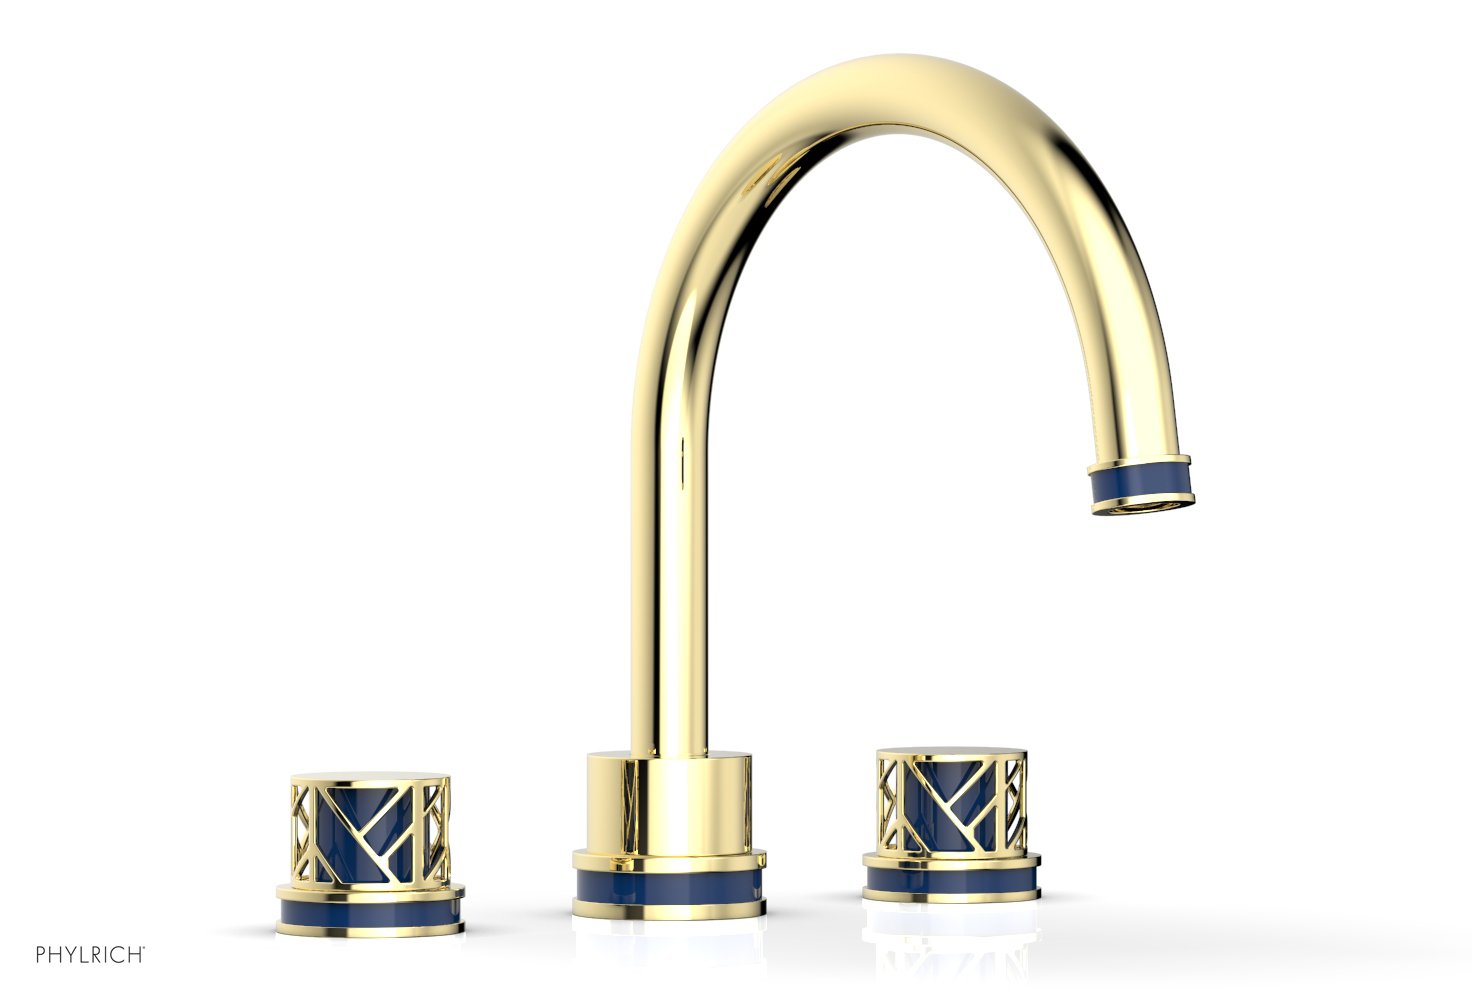 Phylrich JOLIE Deck Tub Set - Round Handles with "Navy Blue" Accents